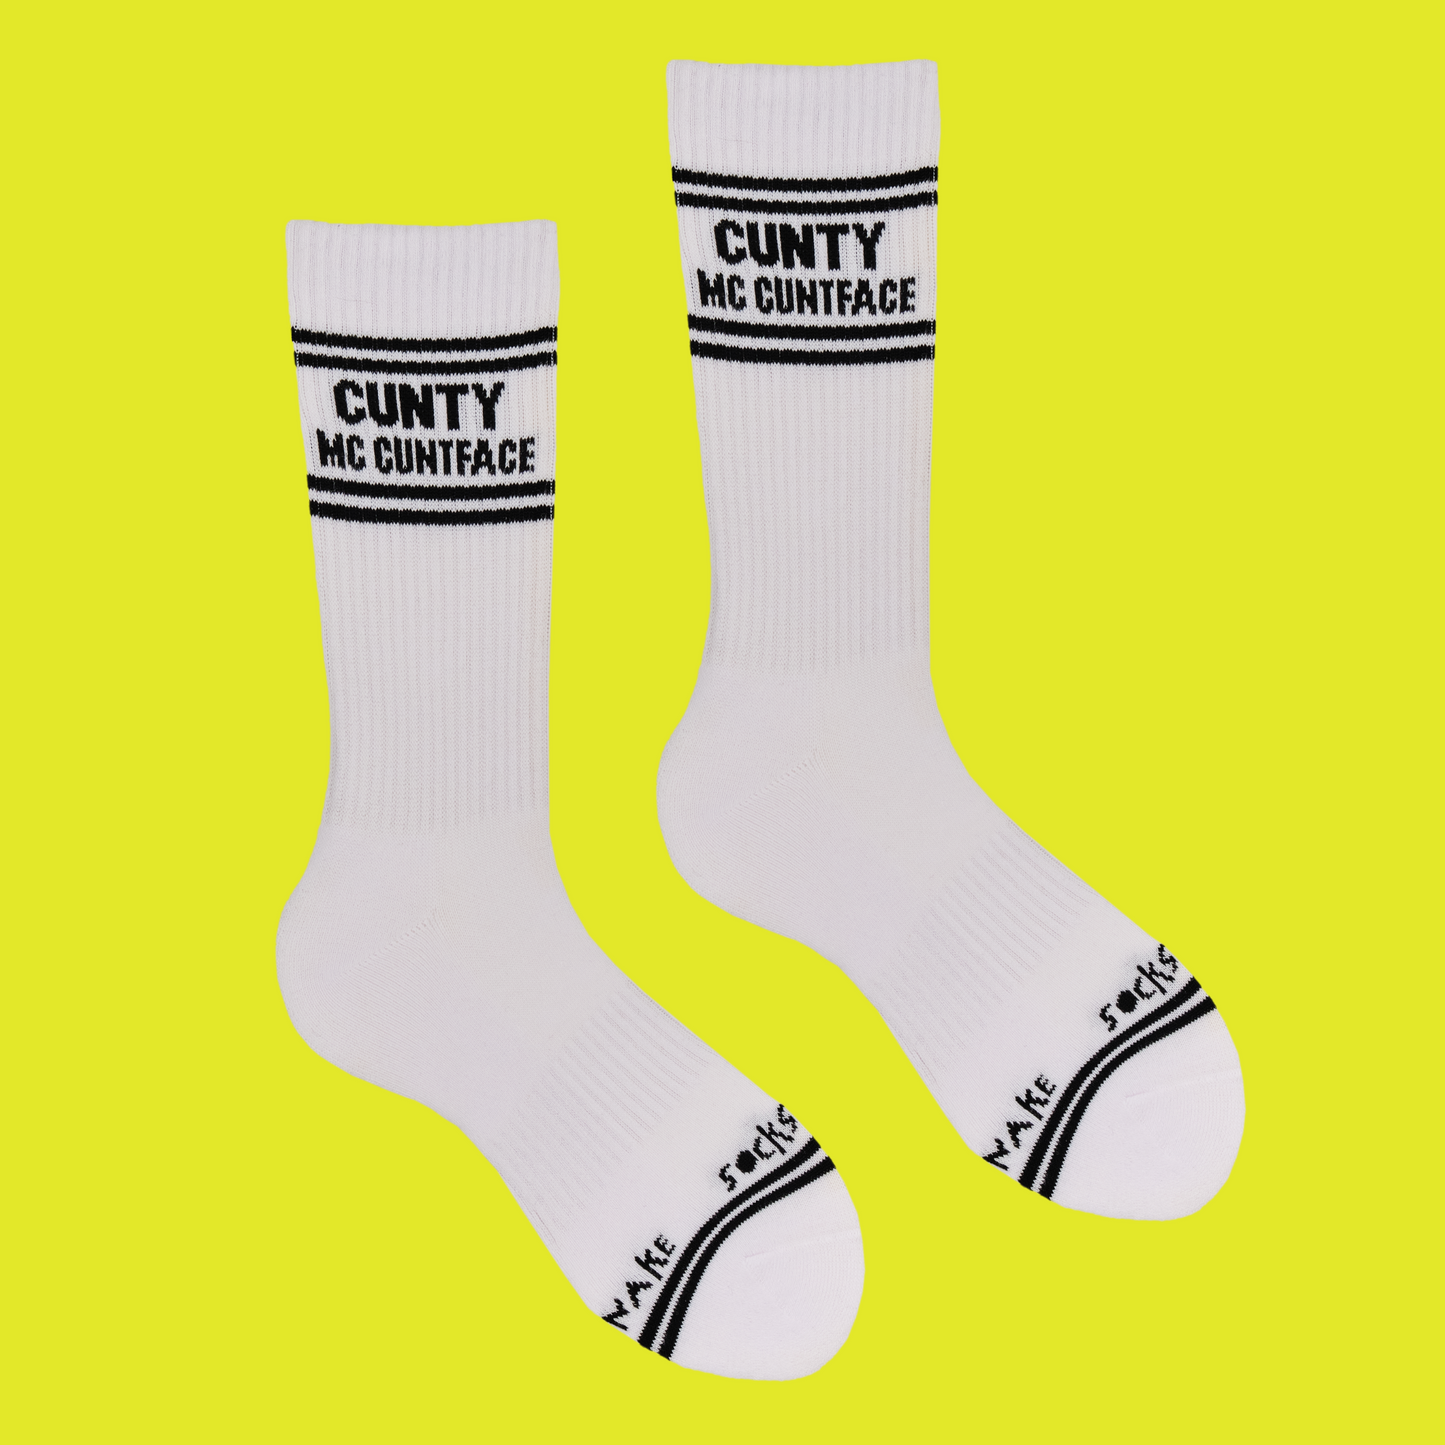 A white pair of athletic socks with black trim on the ankles and toes. With some very rude words on the ankle.